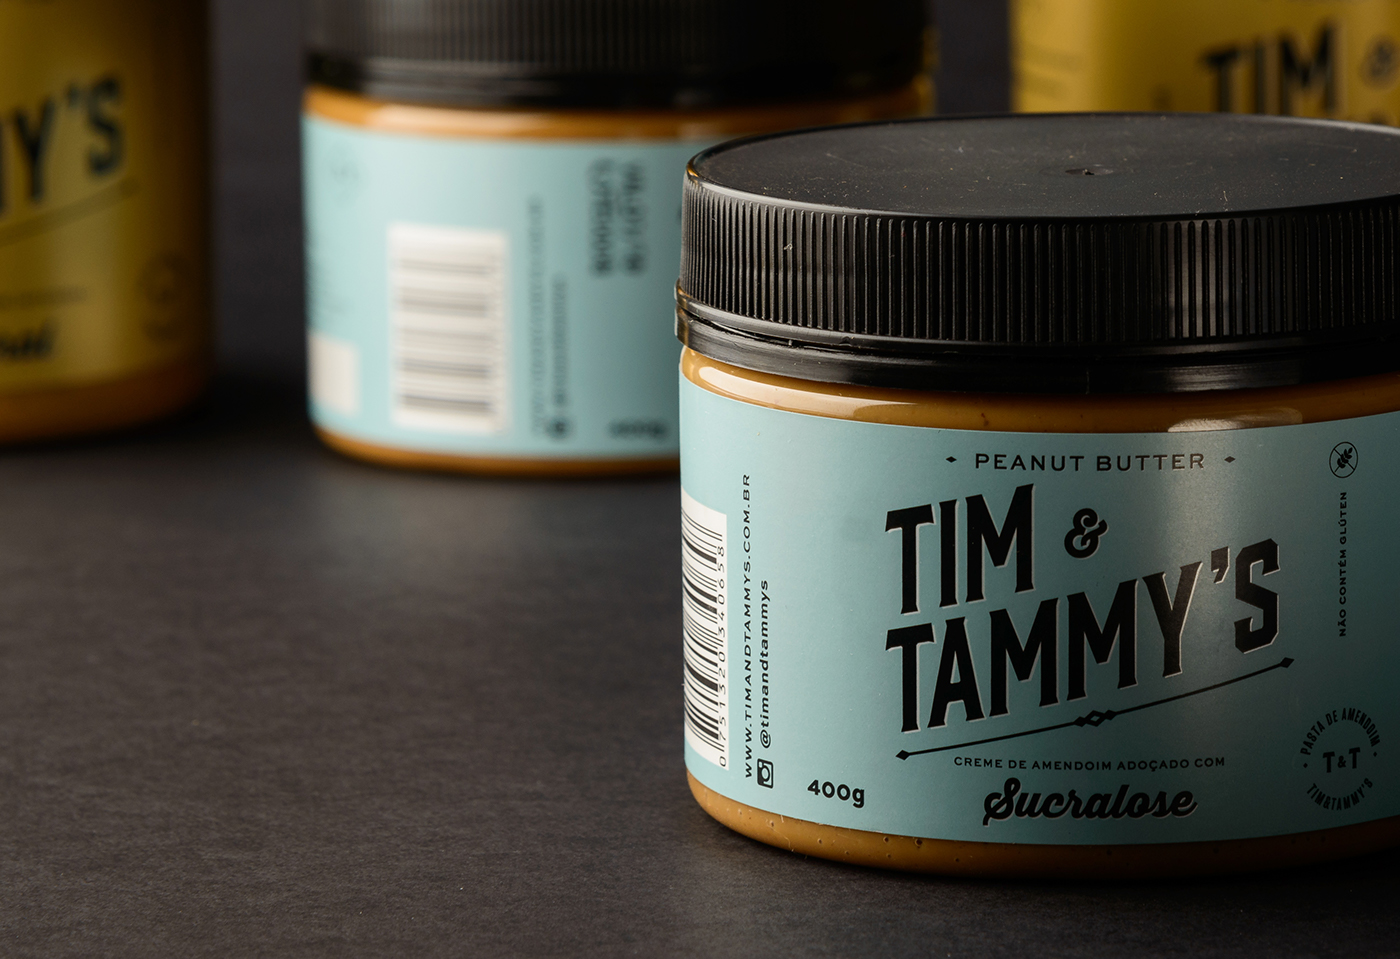 Packaging example #489: Tim & Tammy's - Brand Packaging